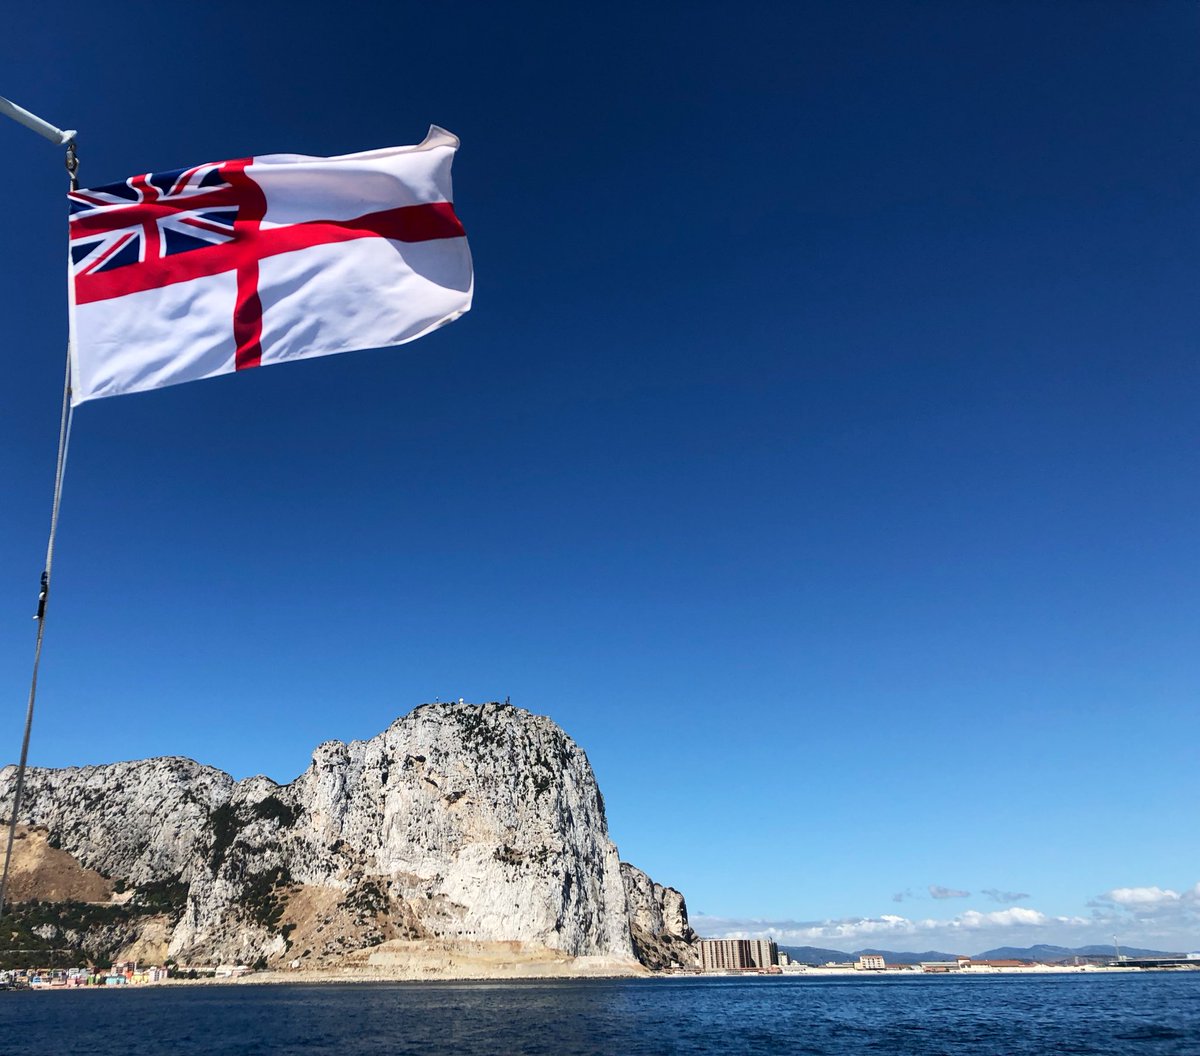 @HMS_Echo @HMS_Forth @RoyalNavy ... there’s only one thing better than a crisp White Ensign flying alongside in Gibraltar... and that’s one flying at sea! #BlackCat #onpatroleveryday